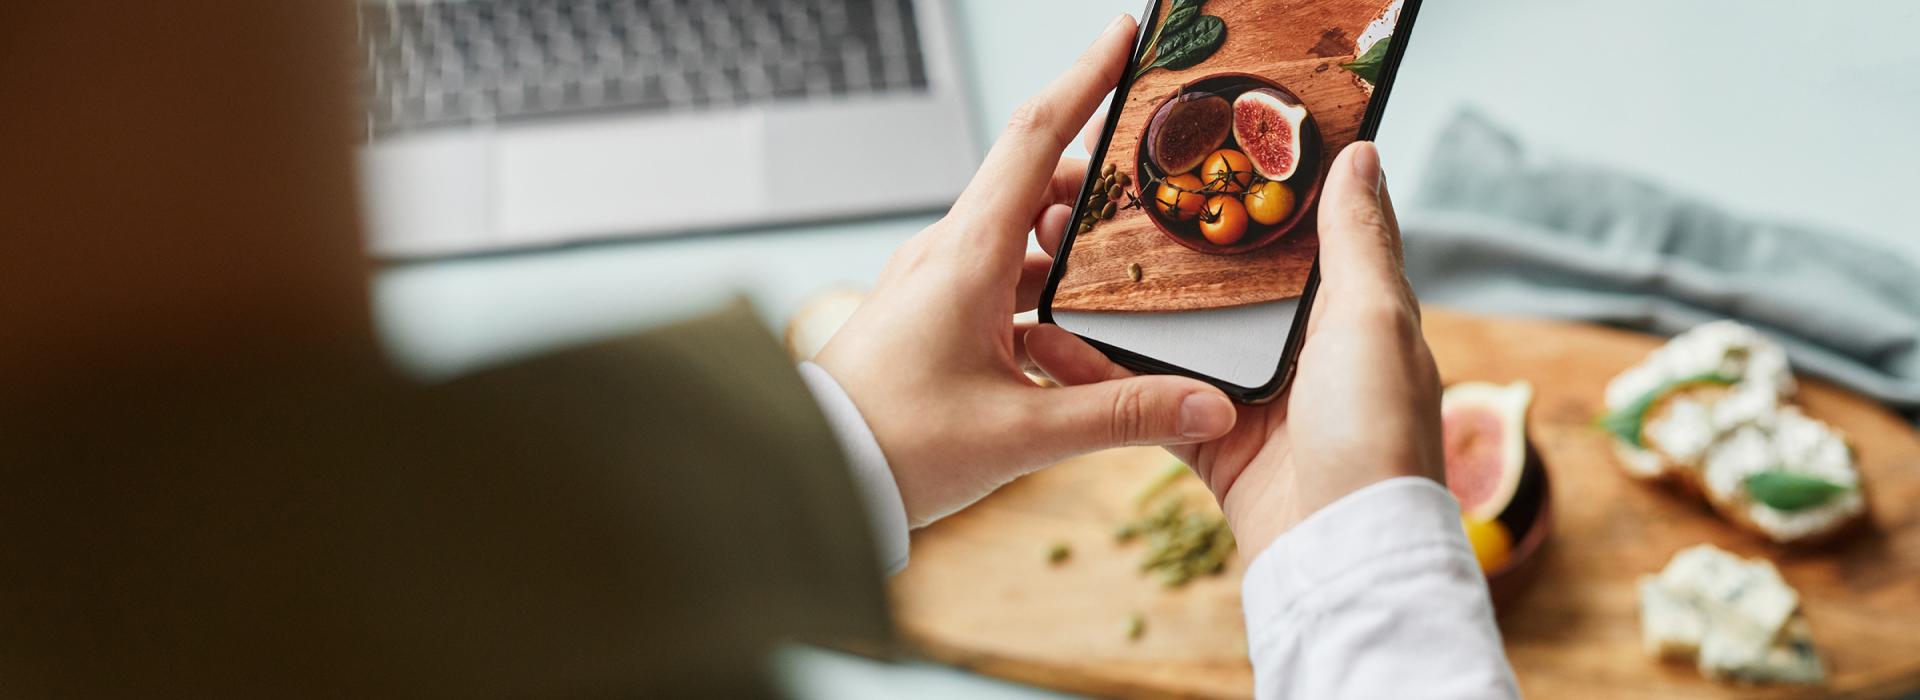 Person photographing food with a smartphone